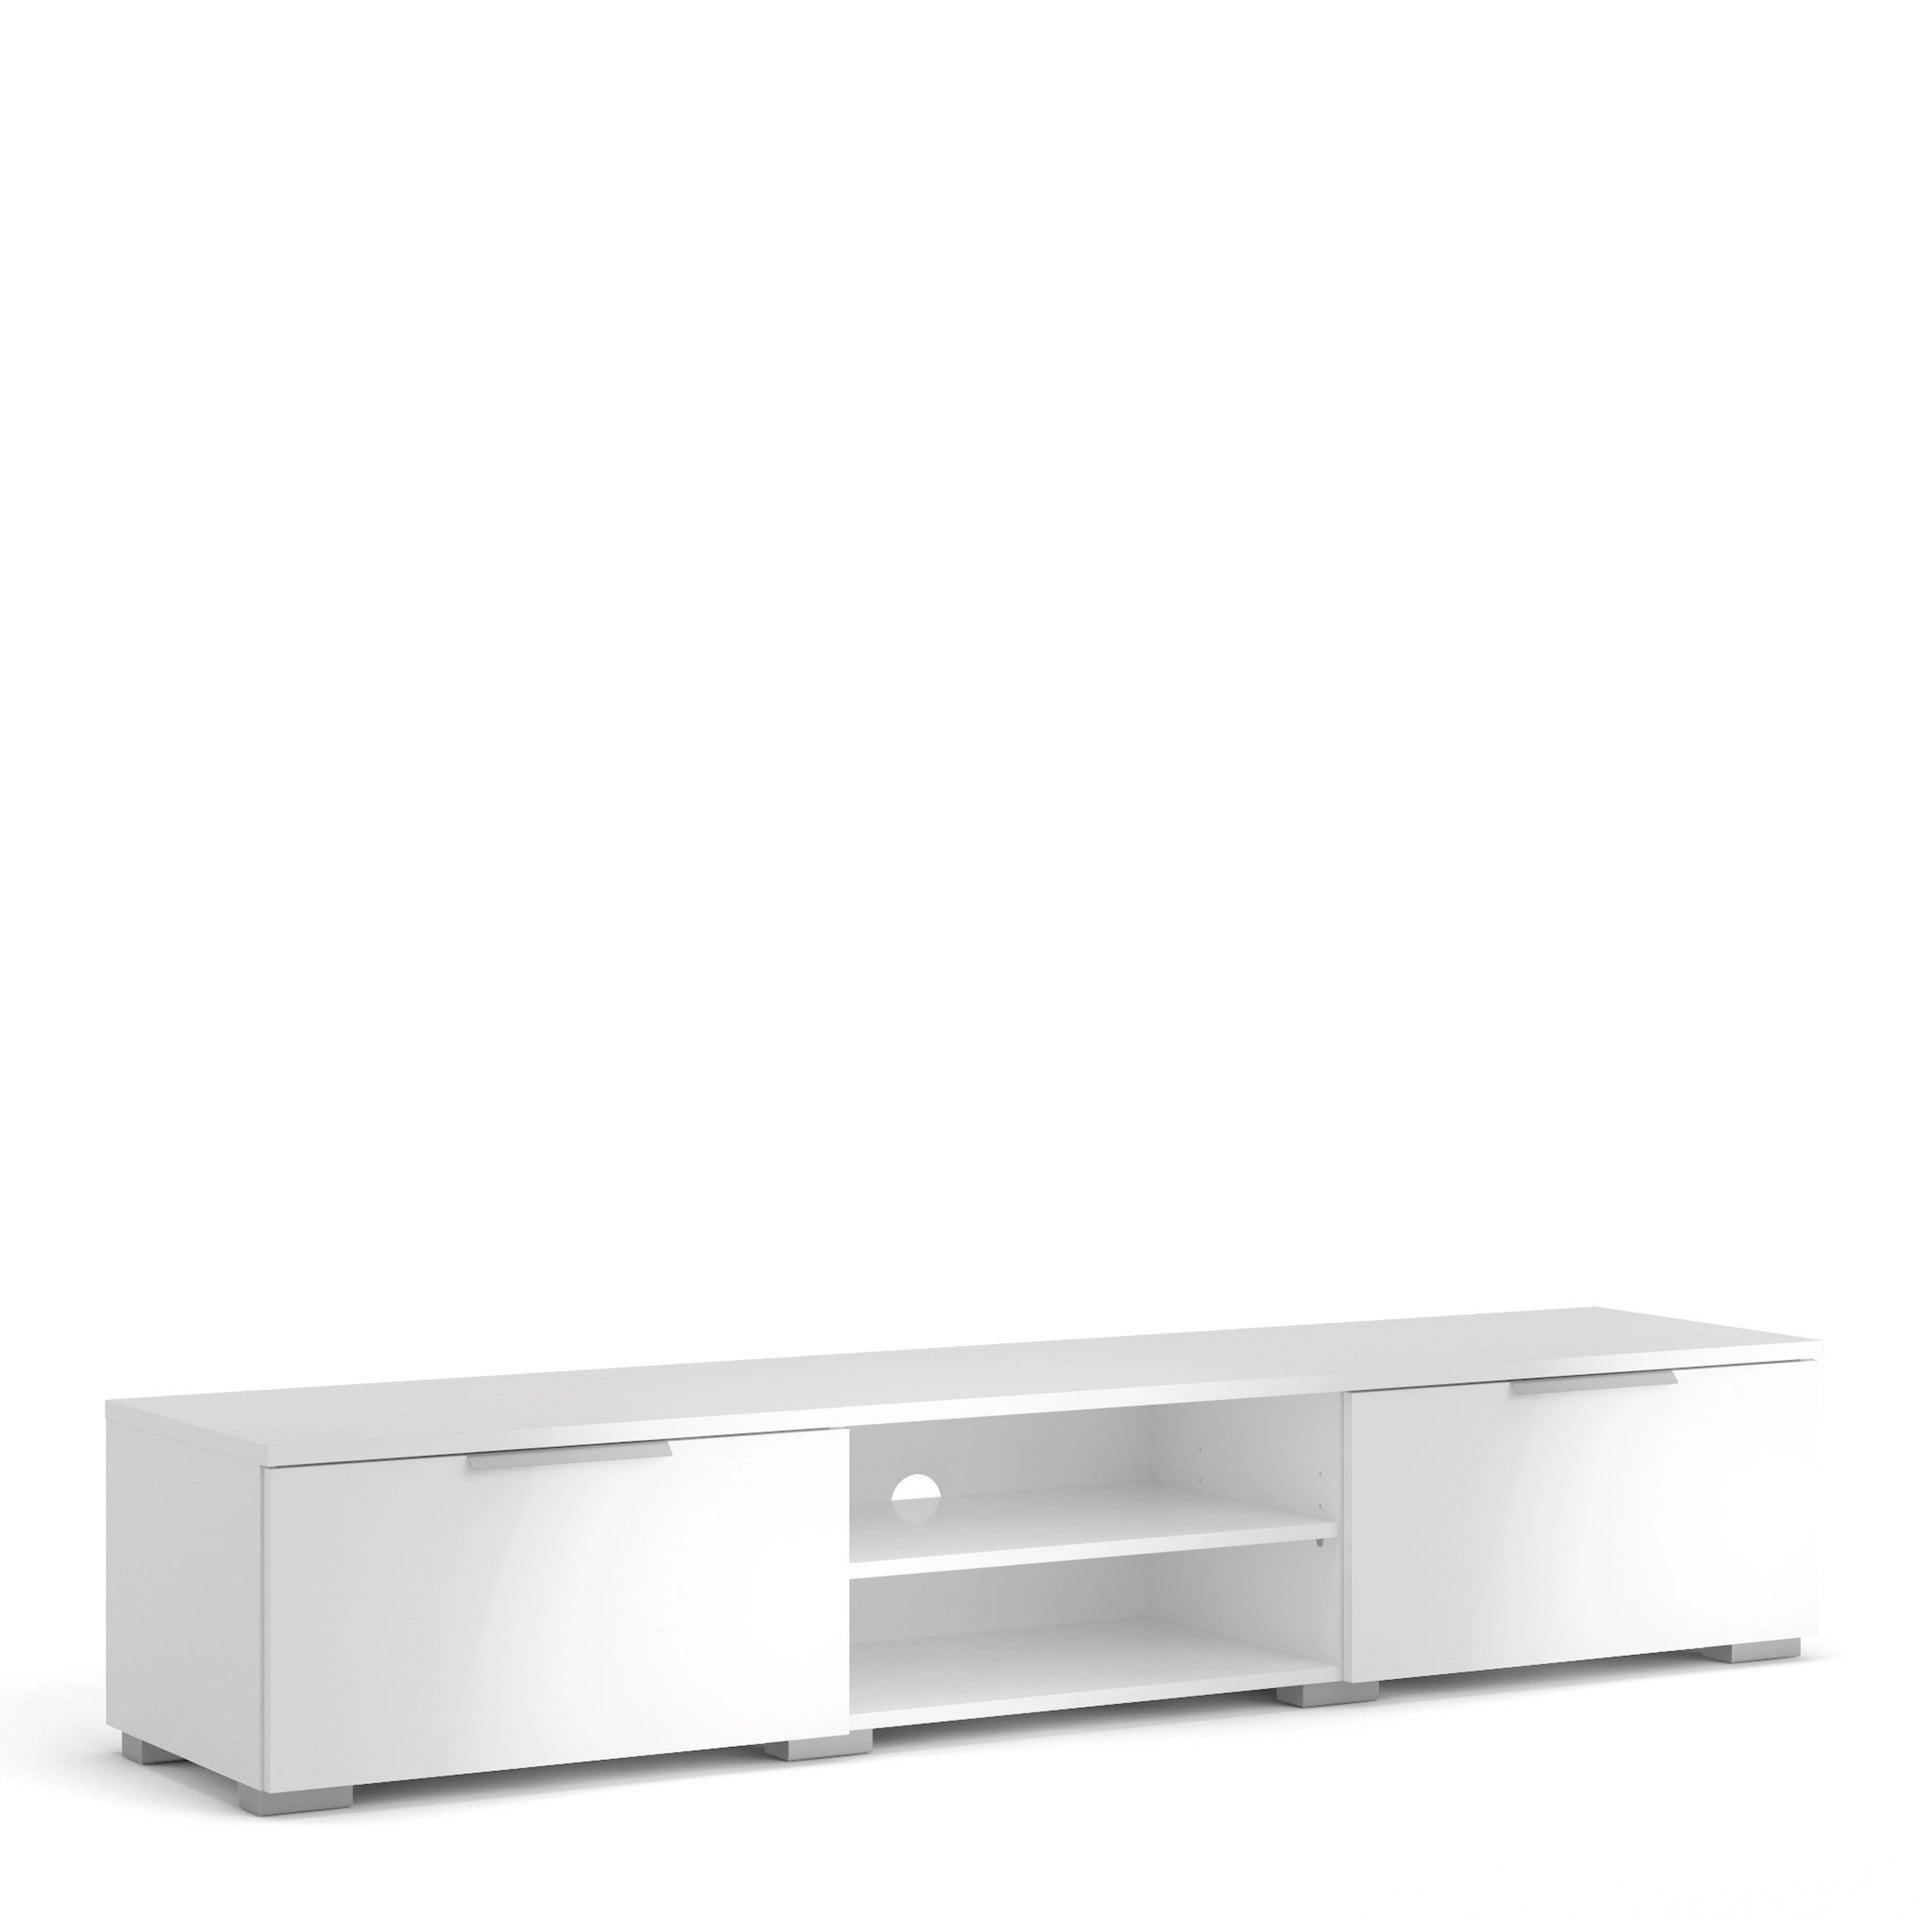 Furniture To Go Match TV Unit 2 Drawers 2 Shelf in White High Gloss